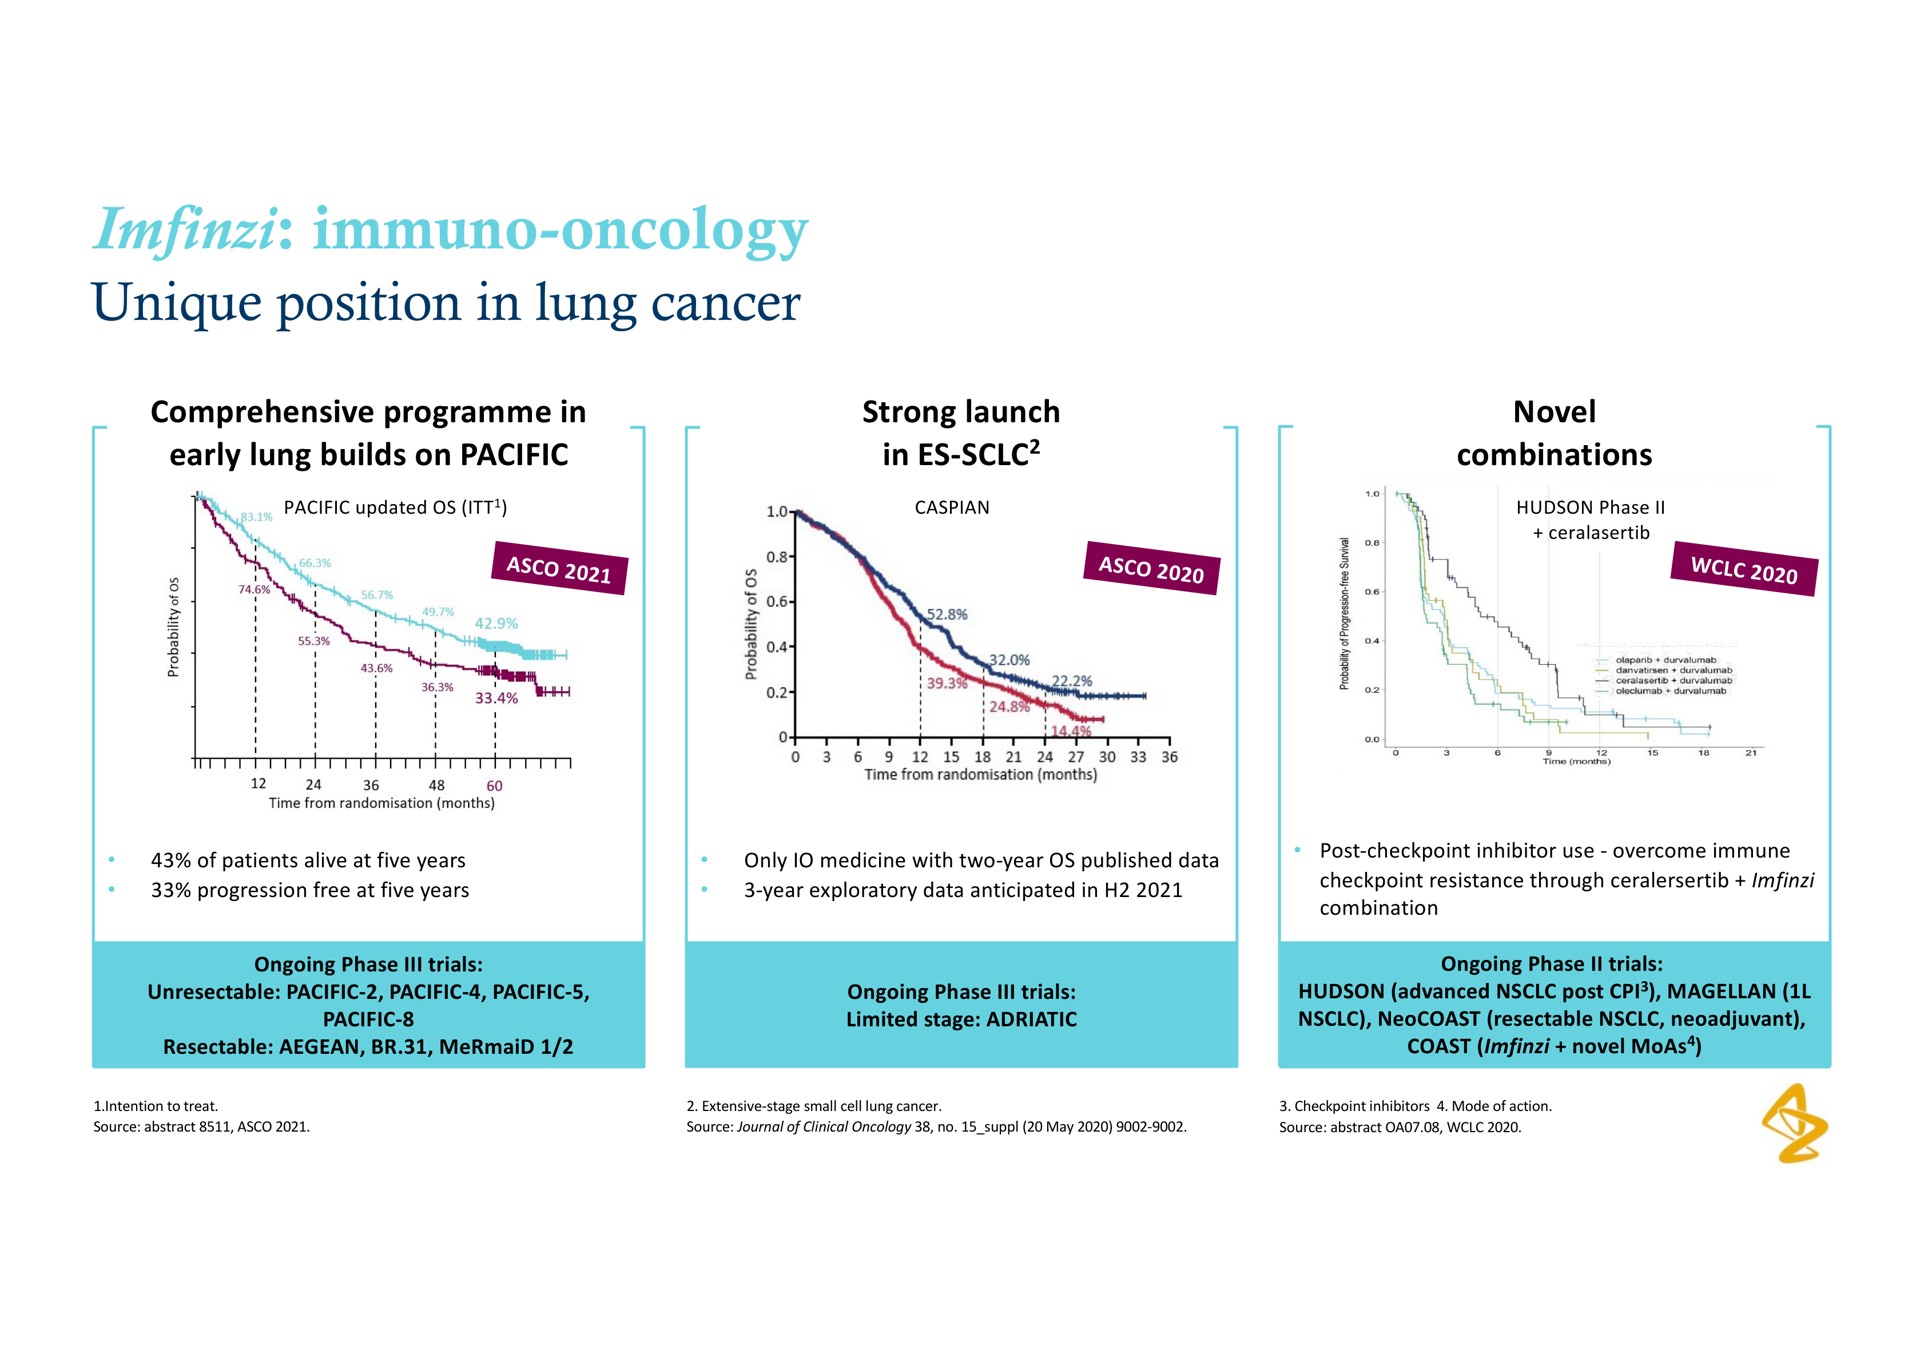 oncology unique position in lung cancer | AstraZeneca